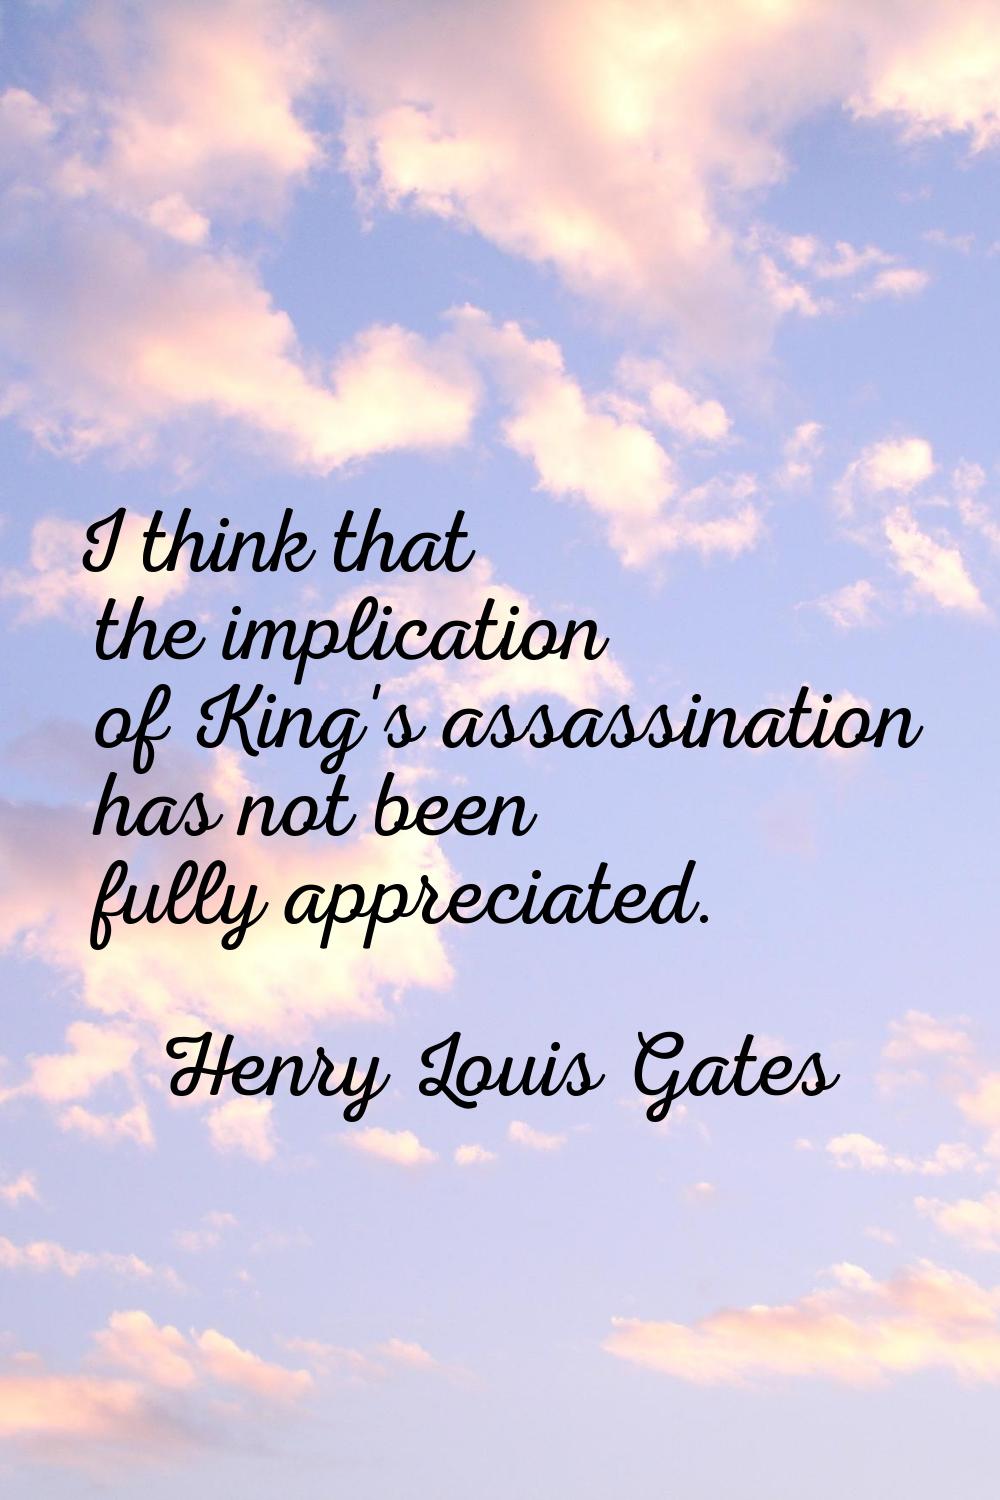 I think that the implication of King's assassination has not been fully appreciated.